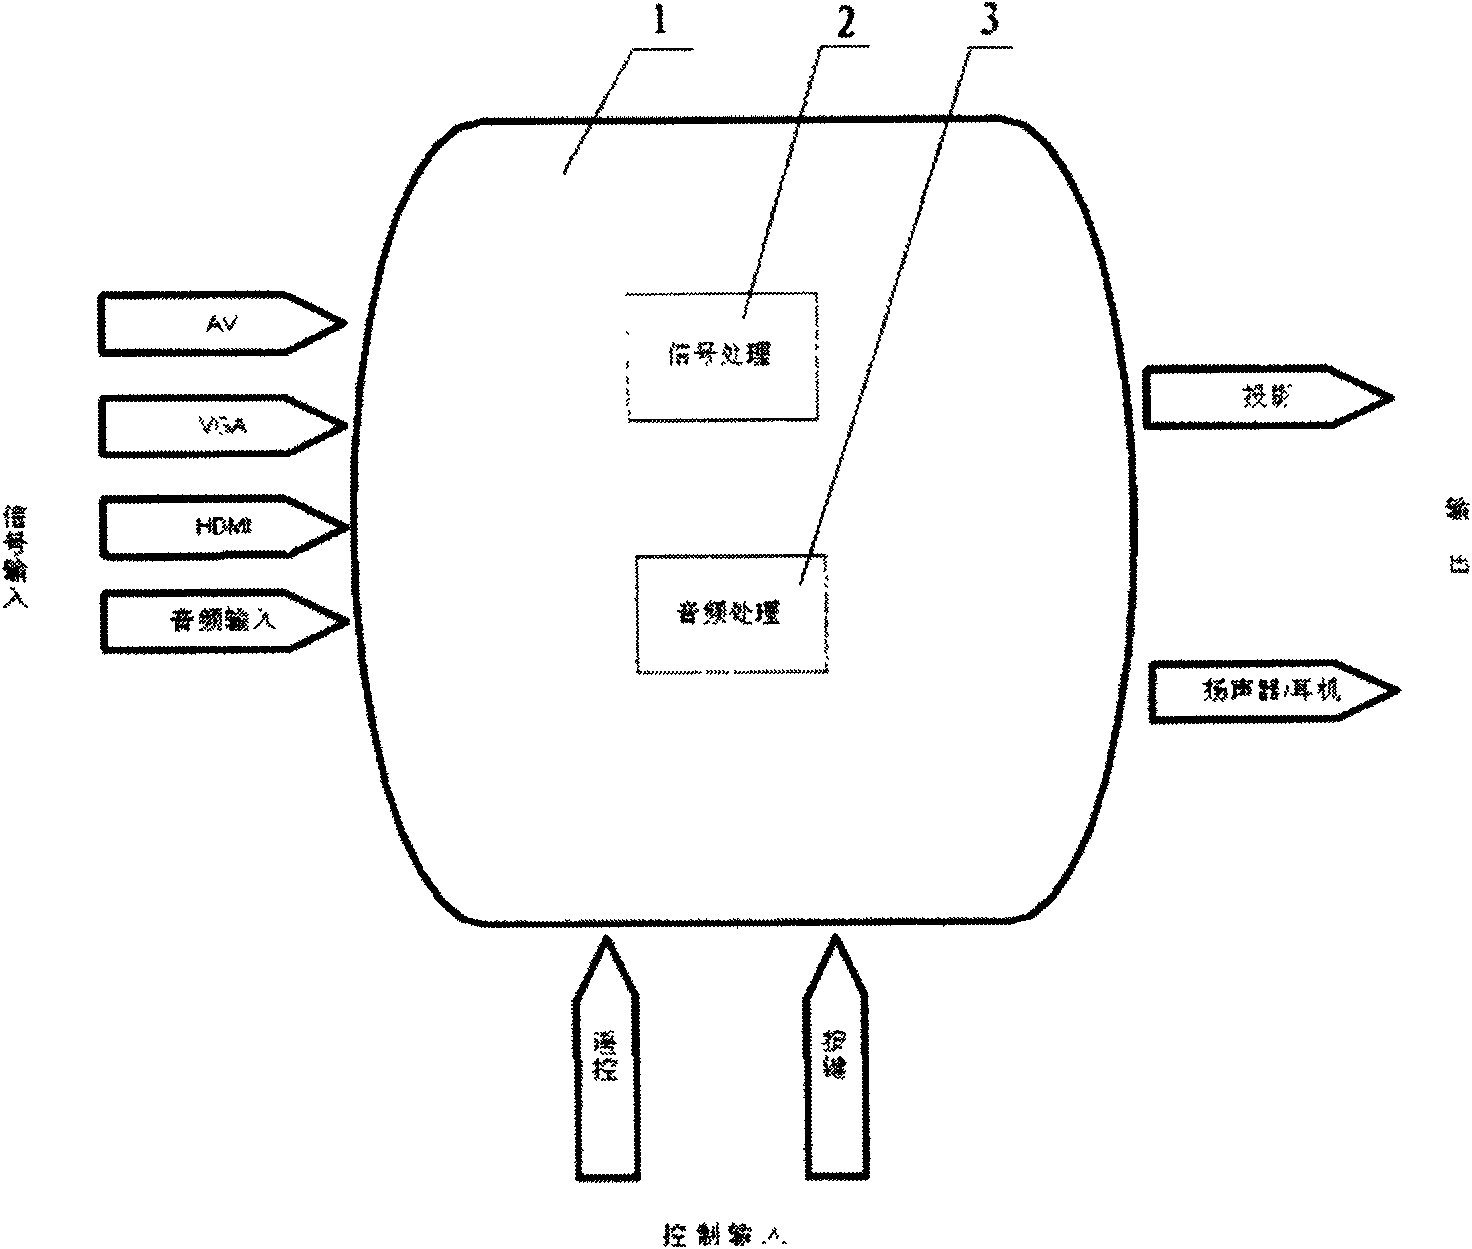 Multimedia projector with embedded operation system